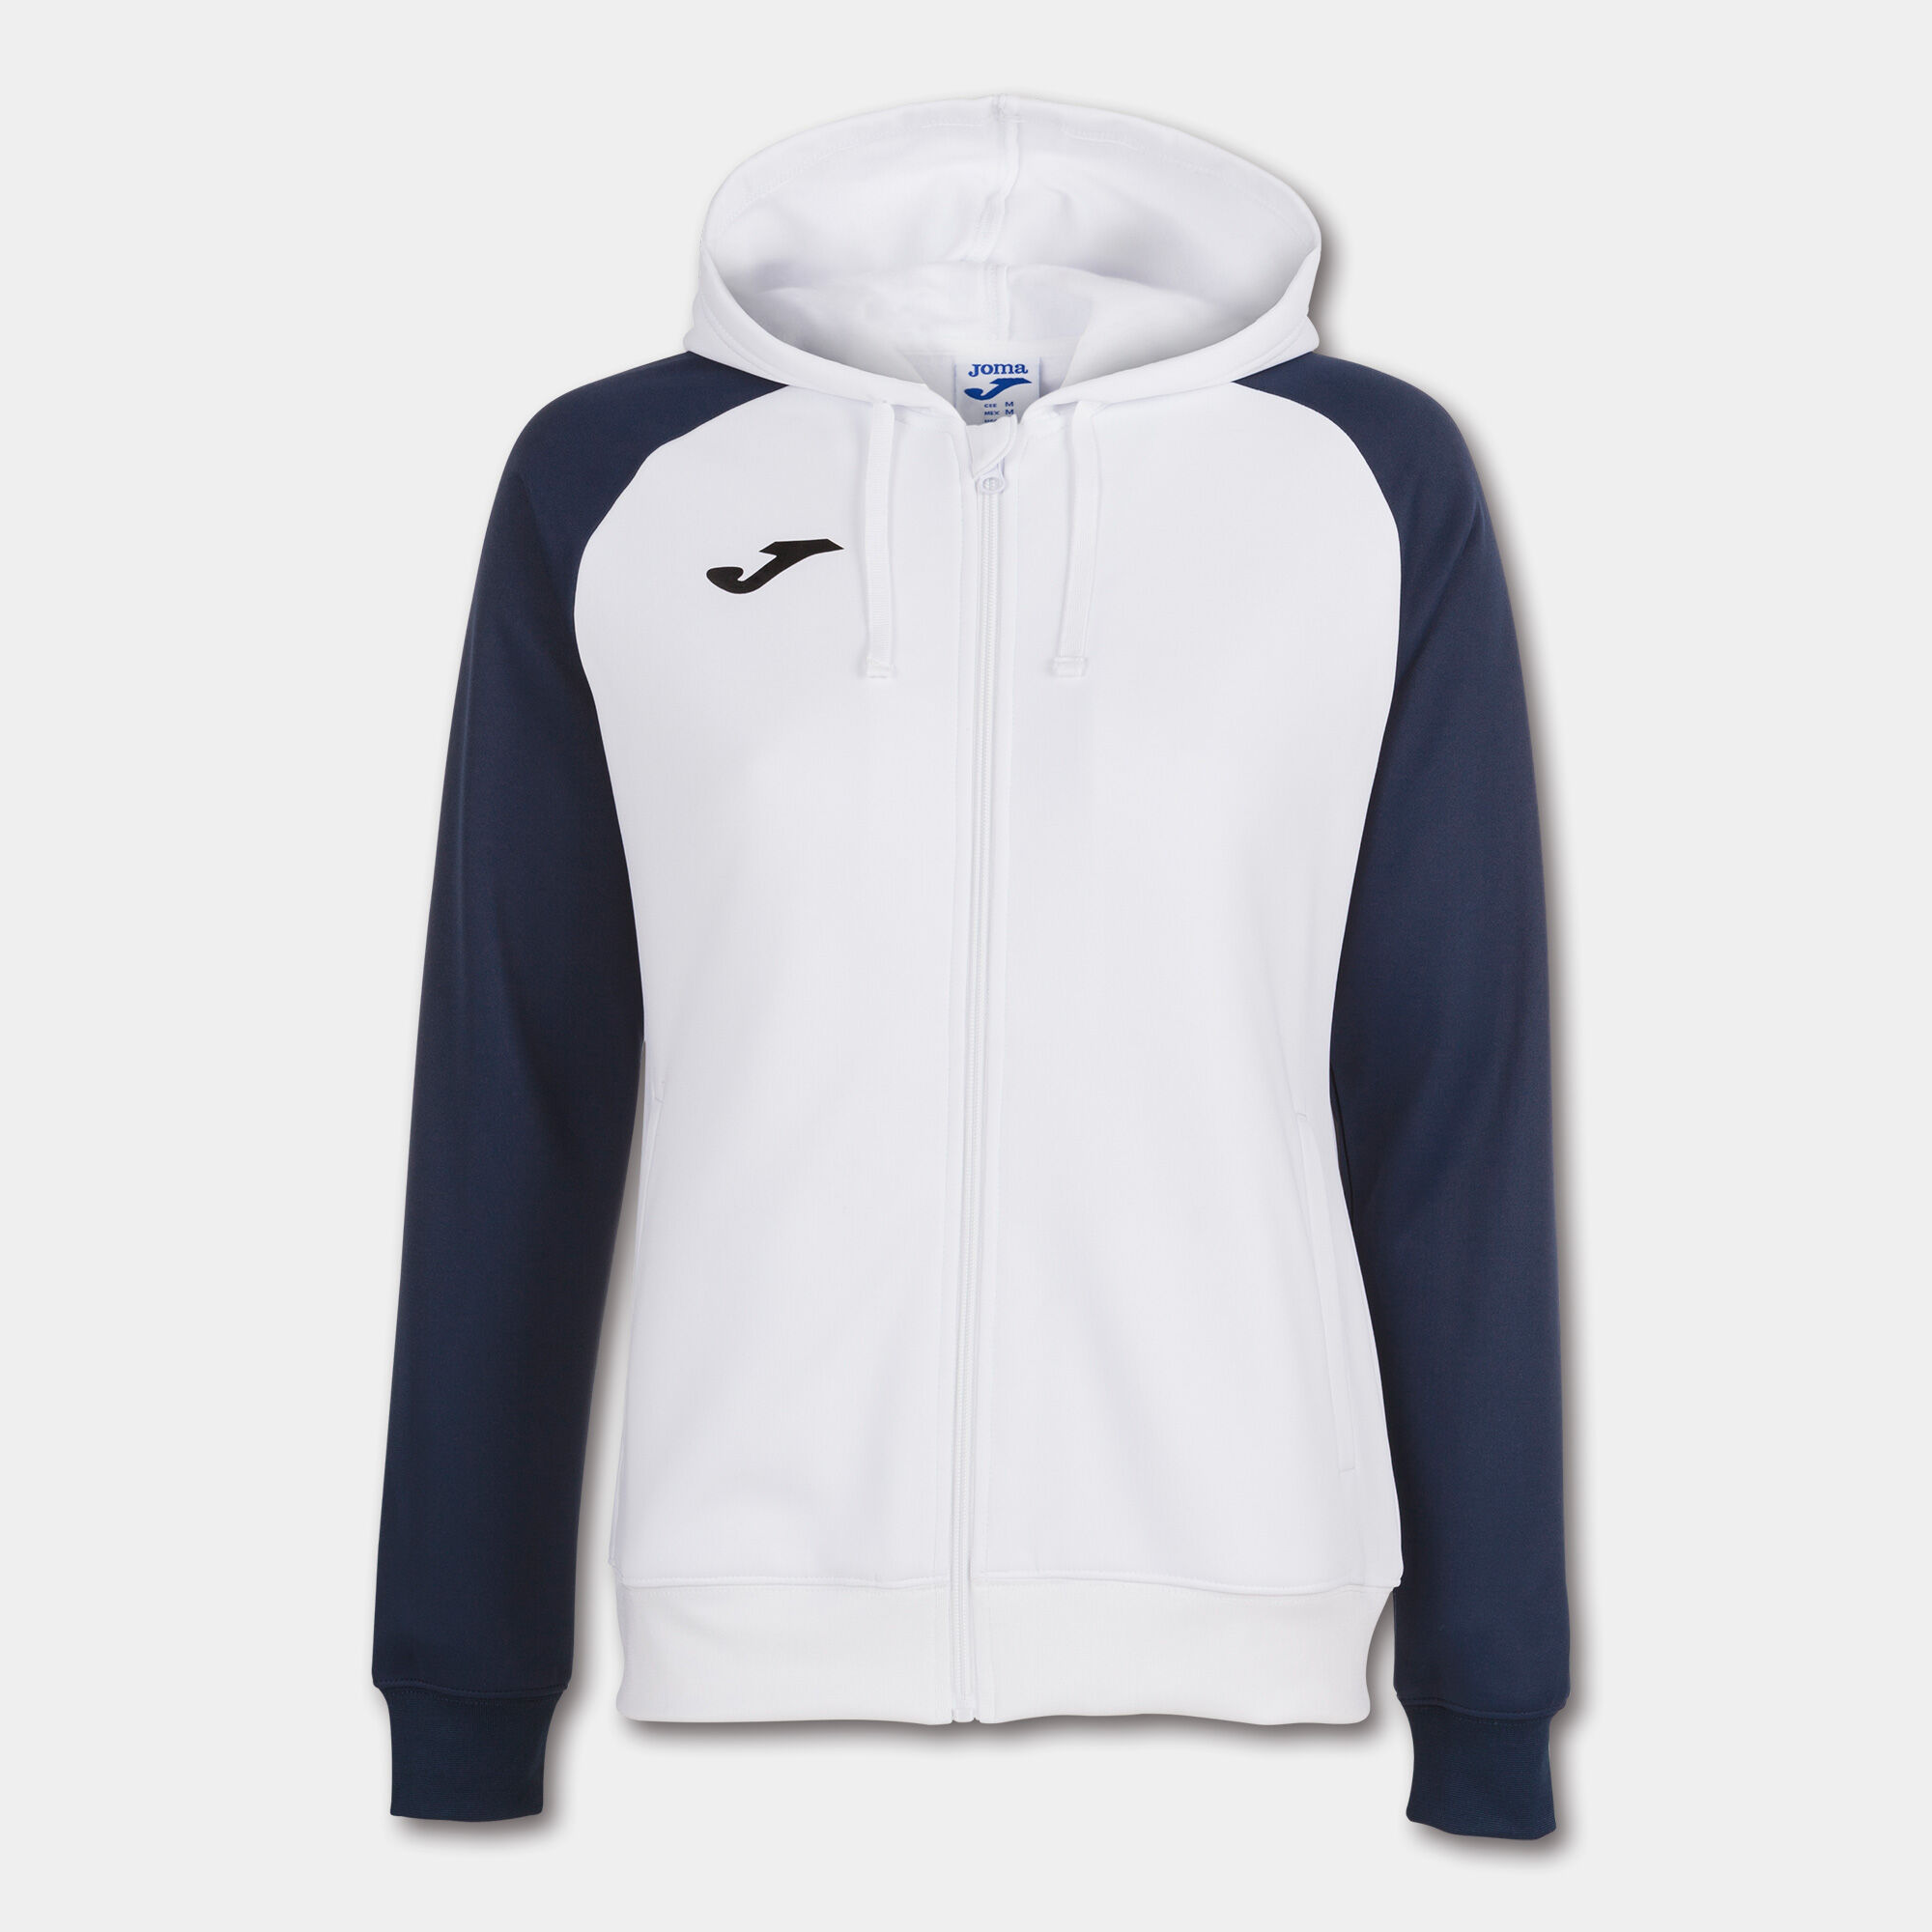 Hooded jacket woman Academy IV white navy blue